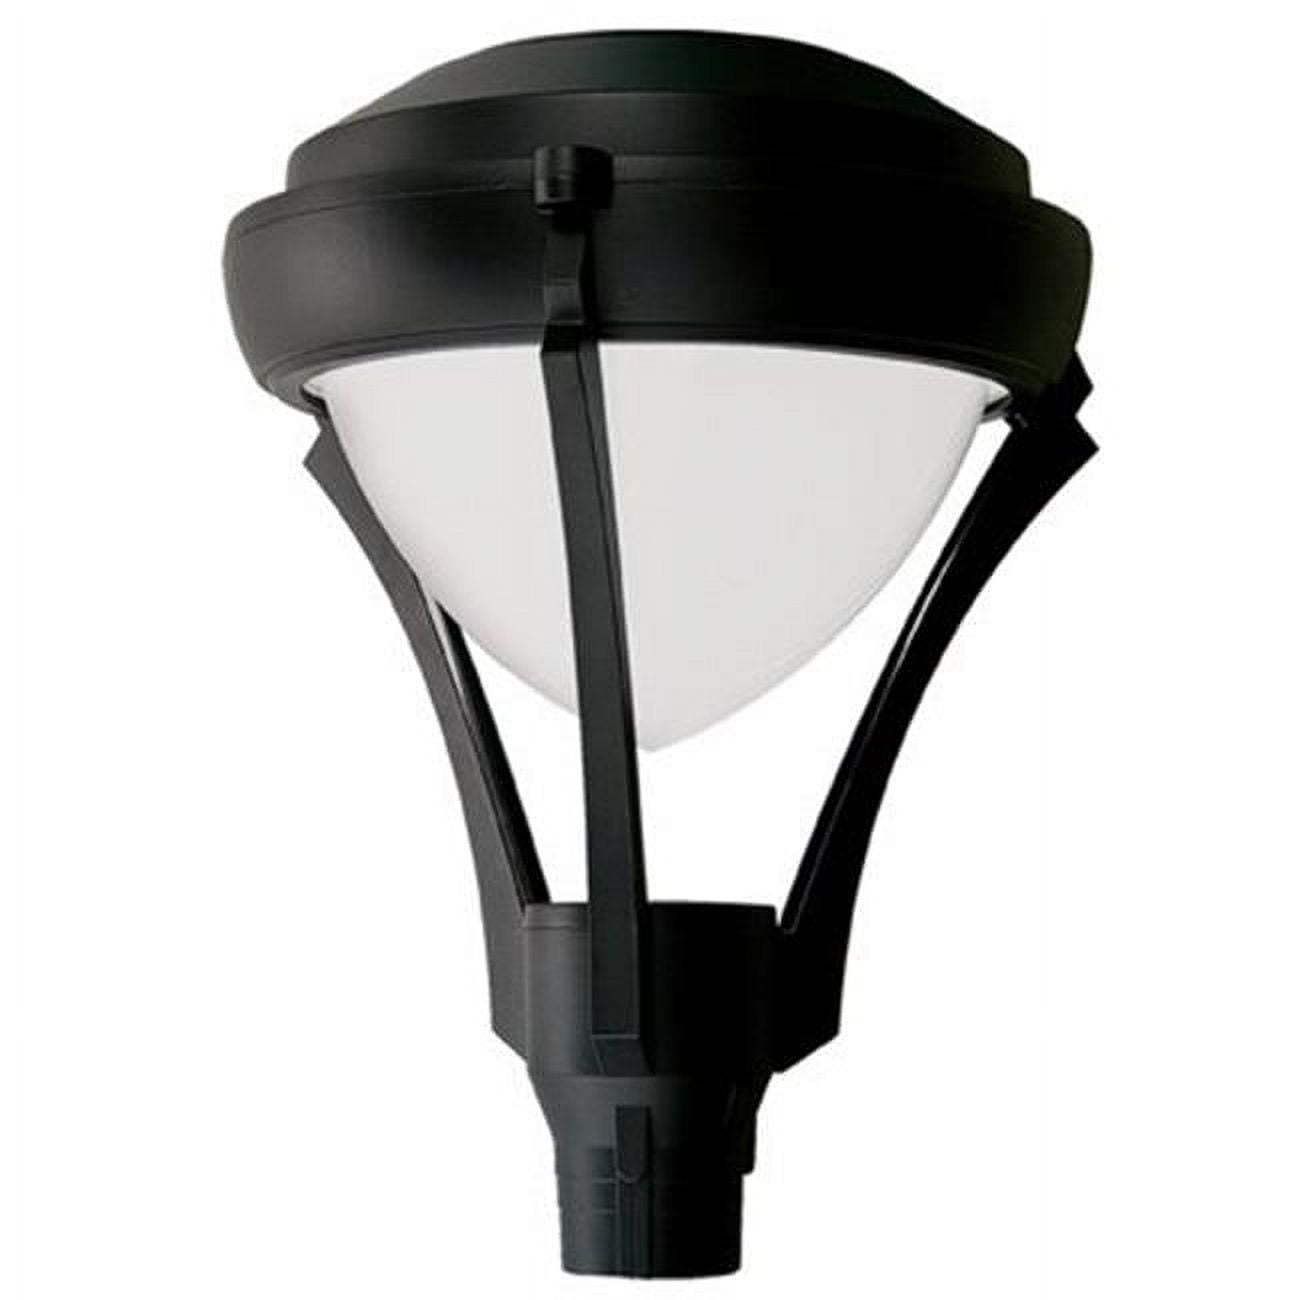 Picture of Dabmar Lighting GM591-B-MT 50W Powder Coated Cast Aluminum Post Top Light Fixture with High Pressure Sodium Lamp, Black - 27.95 x 21.65 x 21.65 in.